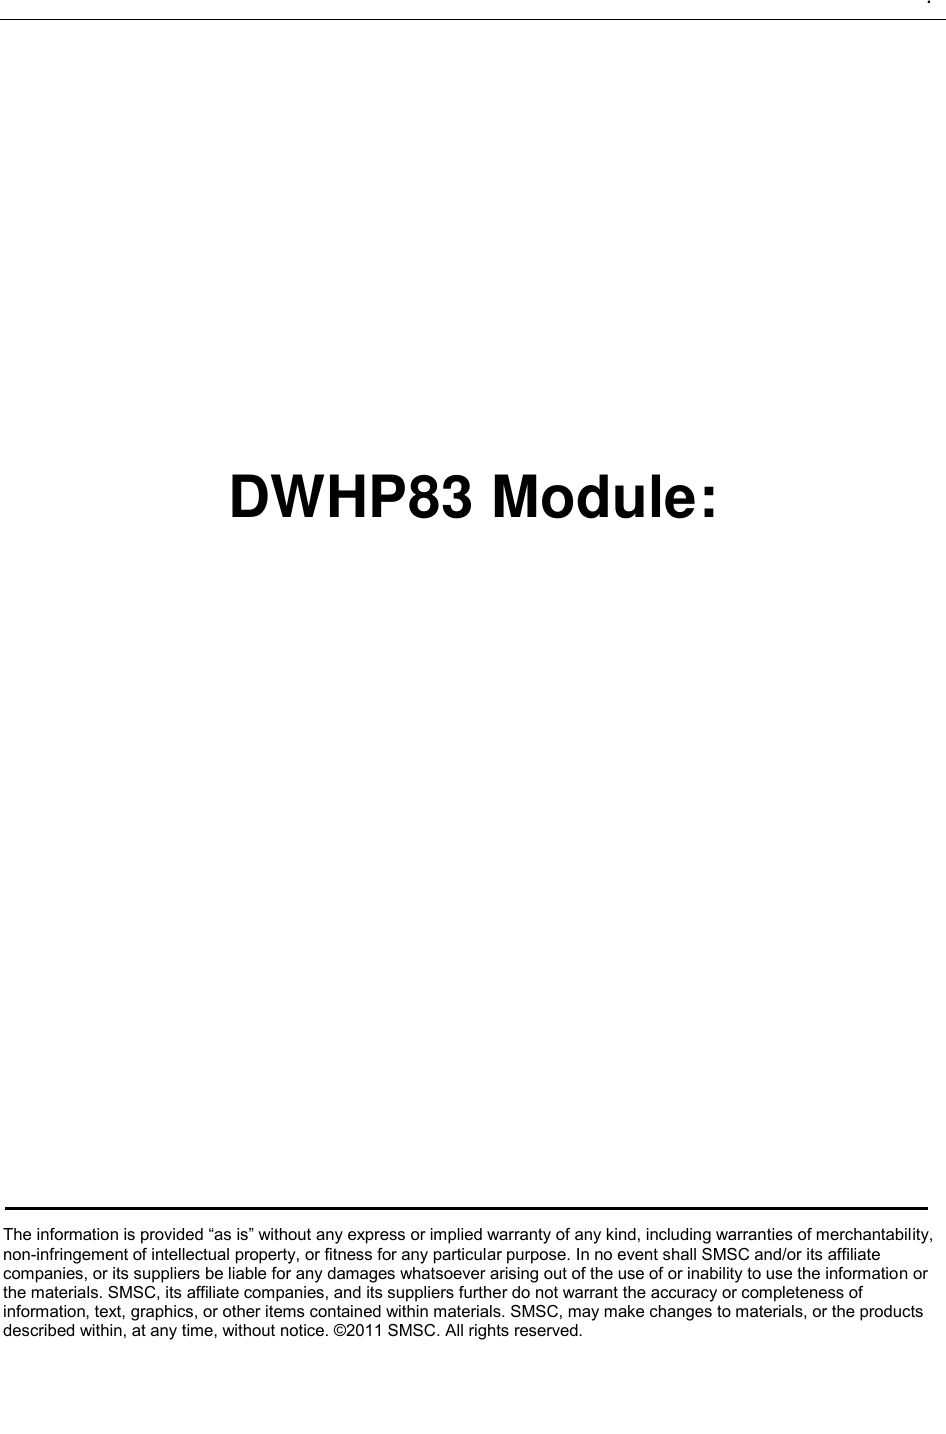   .                   DWHP83 Module:             The information is provided “as is” without any express or implied warranty of any kind, including warranties of merchantability, non-infringement of intellectual property, or fitness for any particular purpose. In no event shall SMSC and/or its affiliate companies, or its suppliers be liable for any damages whatsoever arising out of the use of or inability to use the information or the materials. SMSC, its affiliate companies, and its suppliers further do not warrant the accuracy or completeness of information, text, graphics, or other items contained within materials. SMSC, may make changes to materials, or the products described within, at any time, without notice. ©2011 SMSC. All rights reserved.   